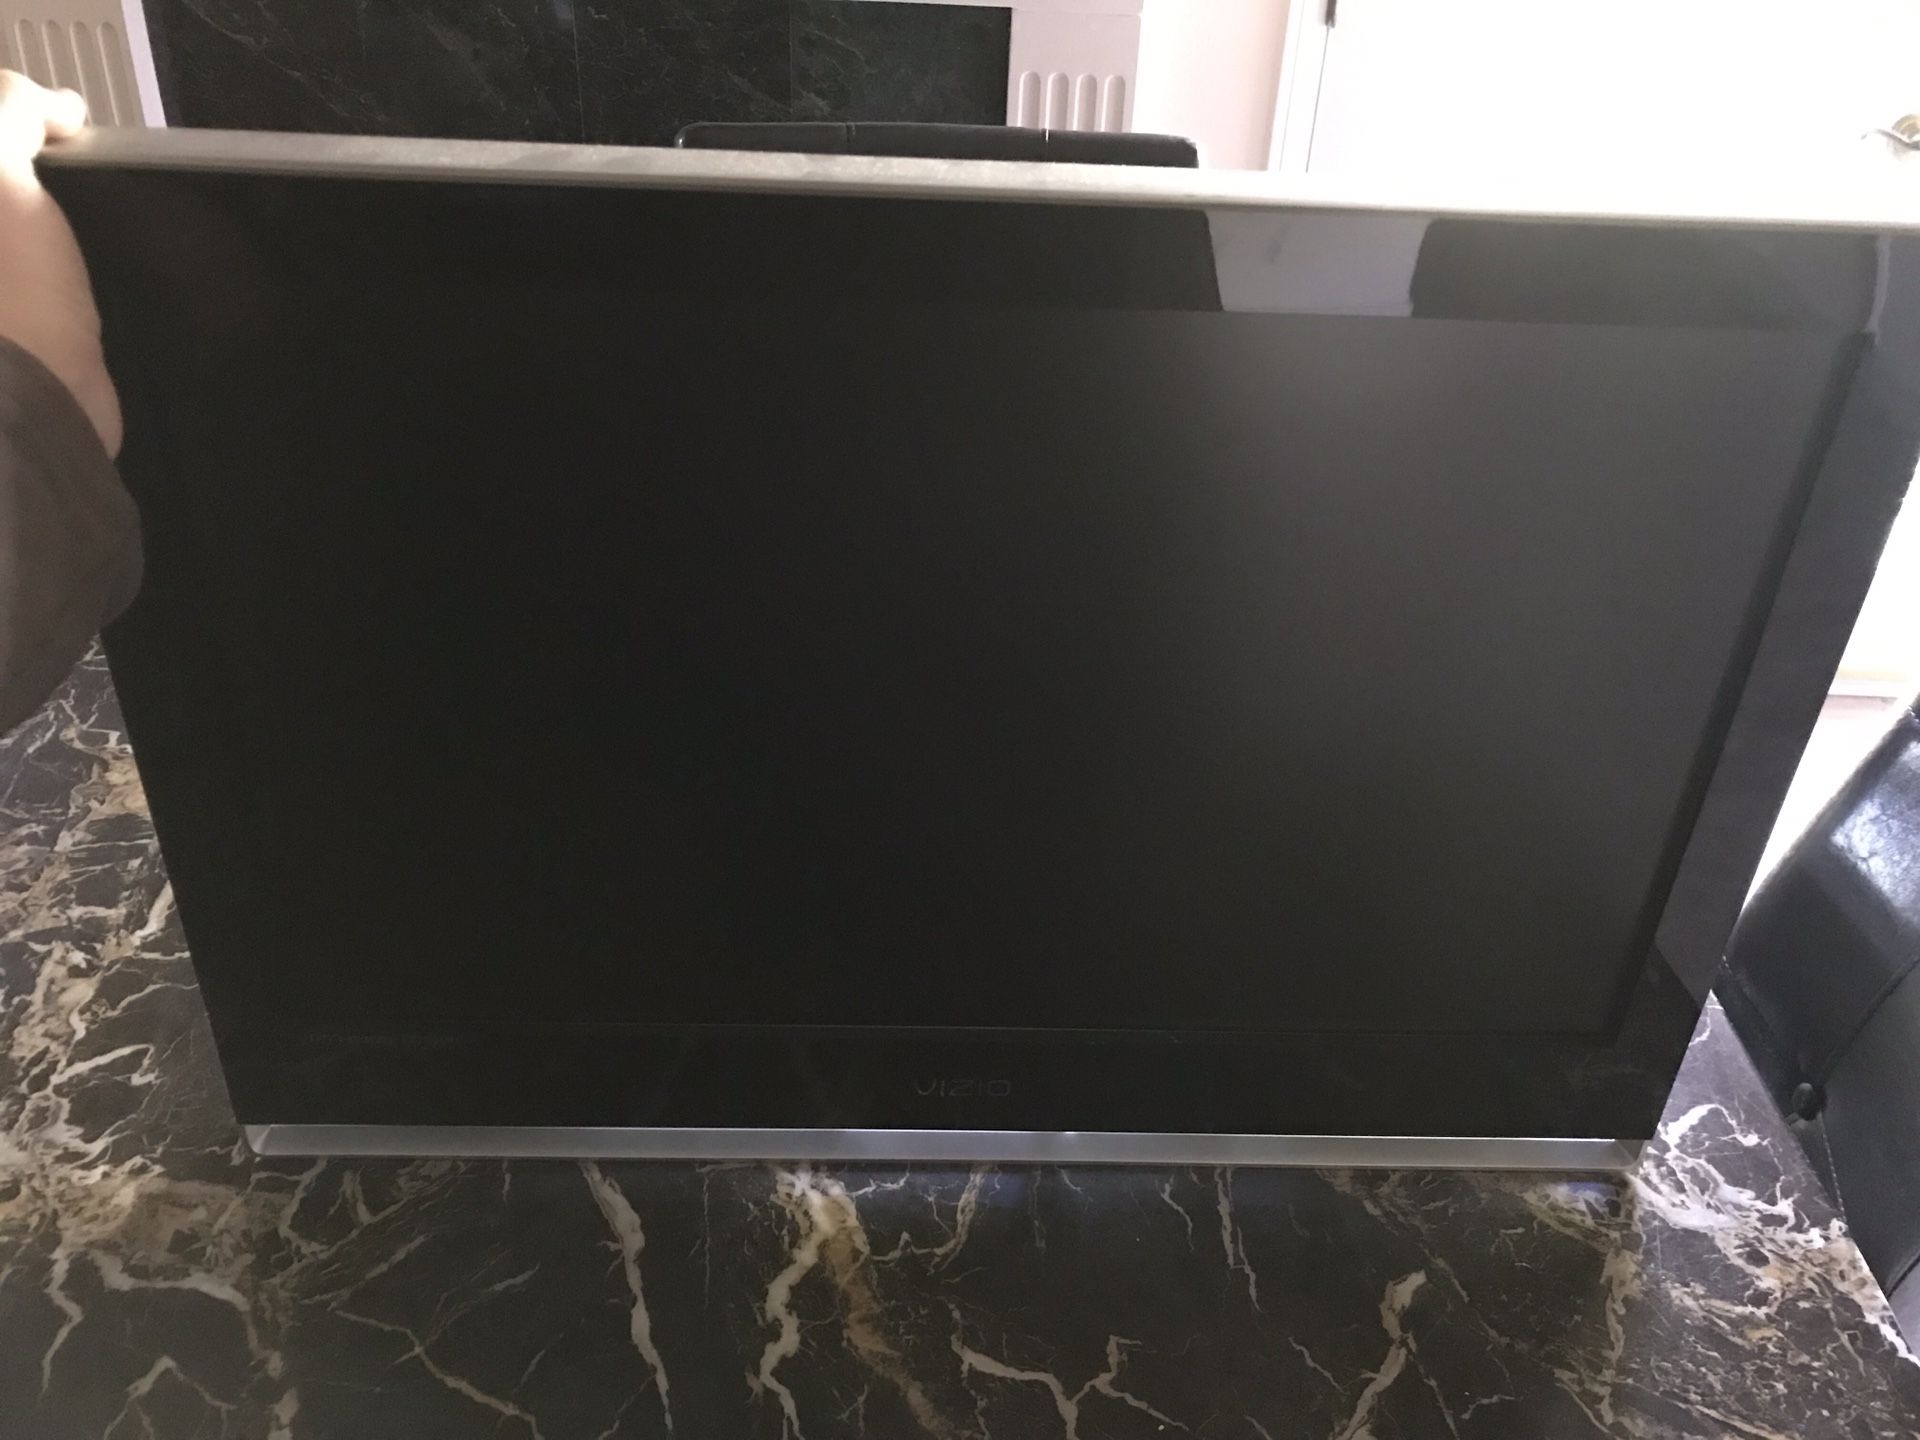 32 inch VIZIO TV with wall mount.